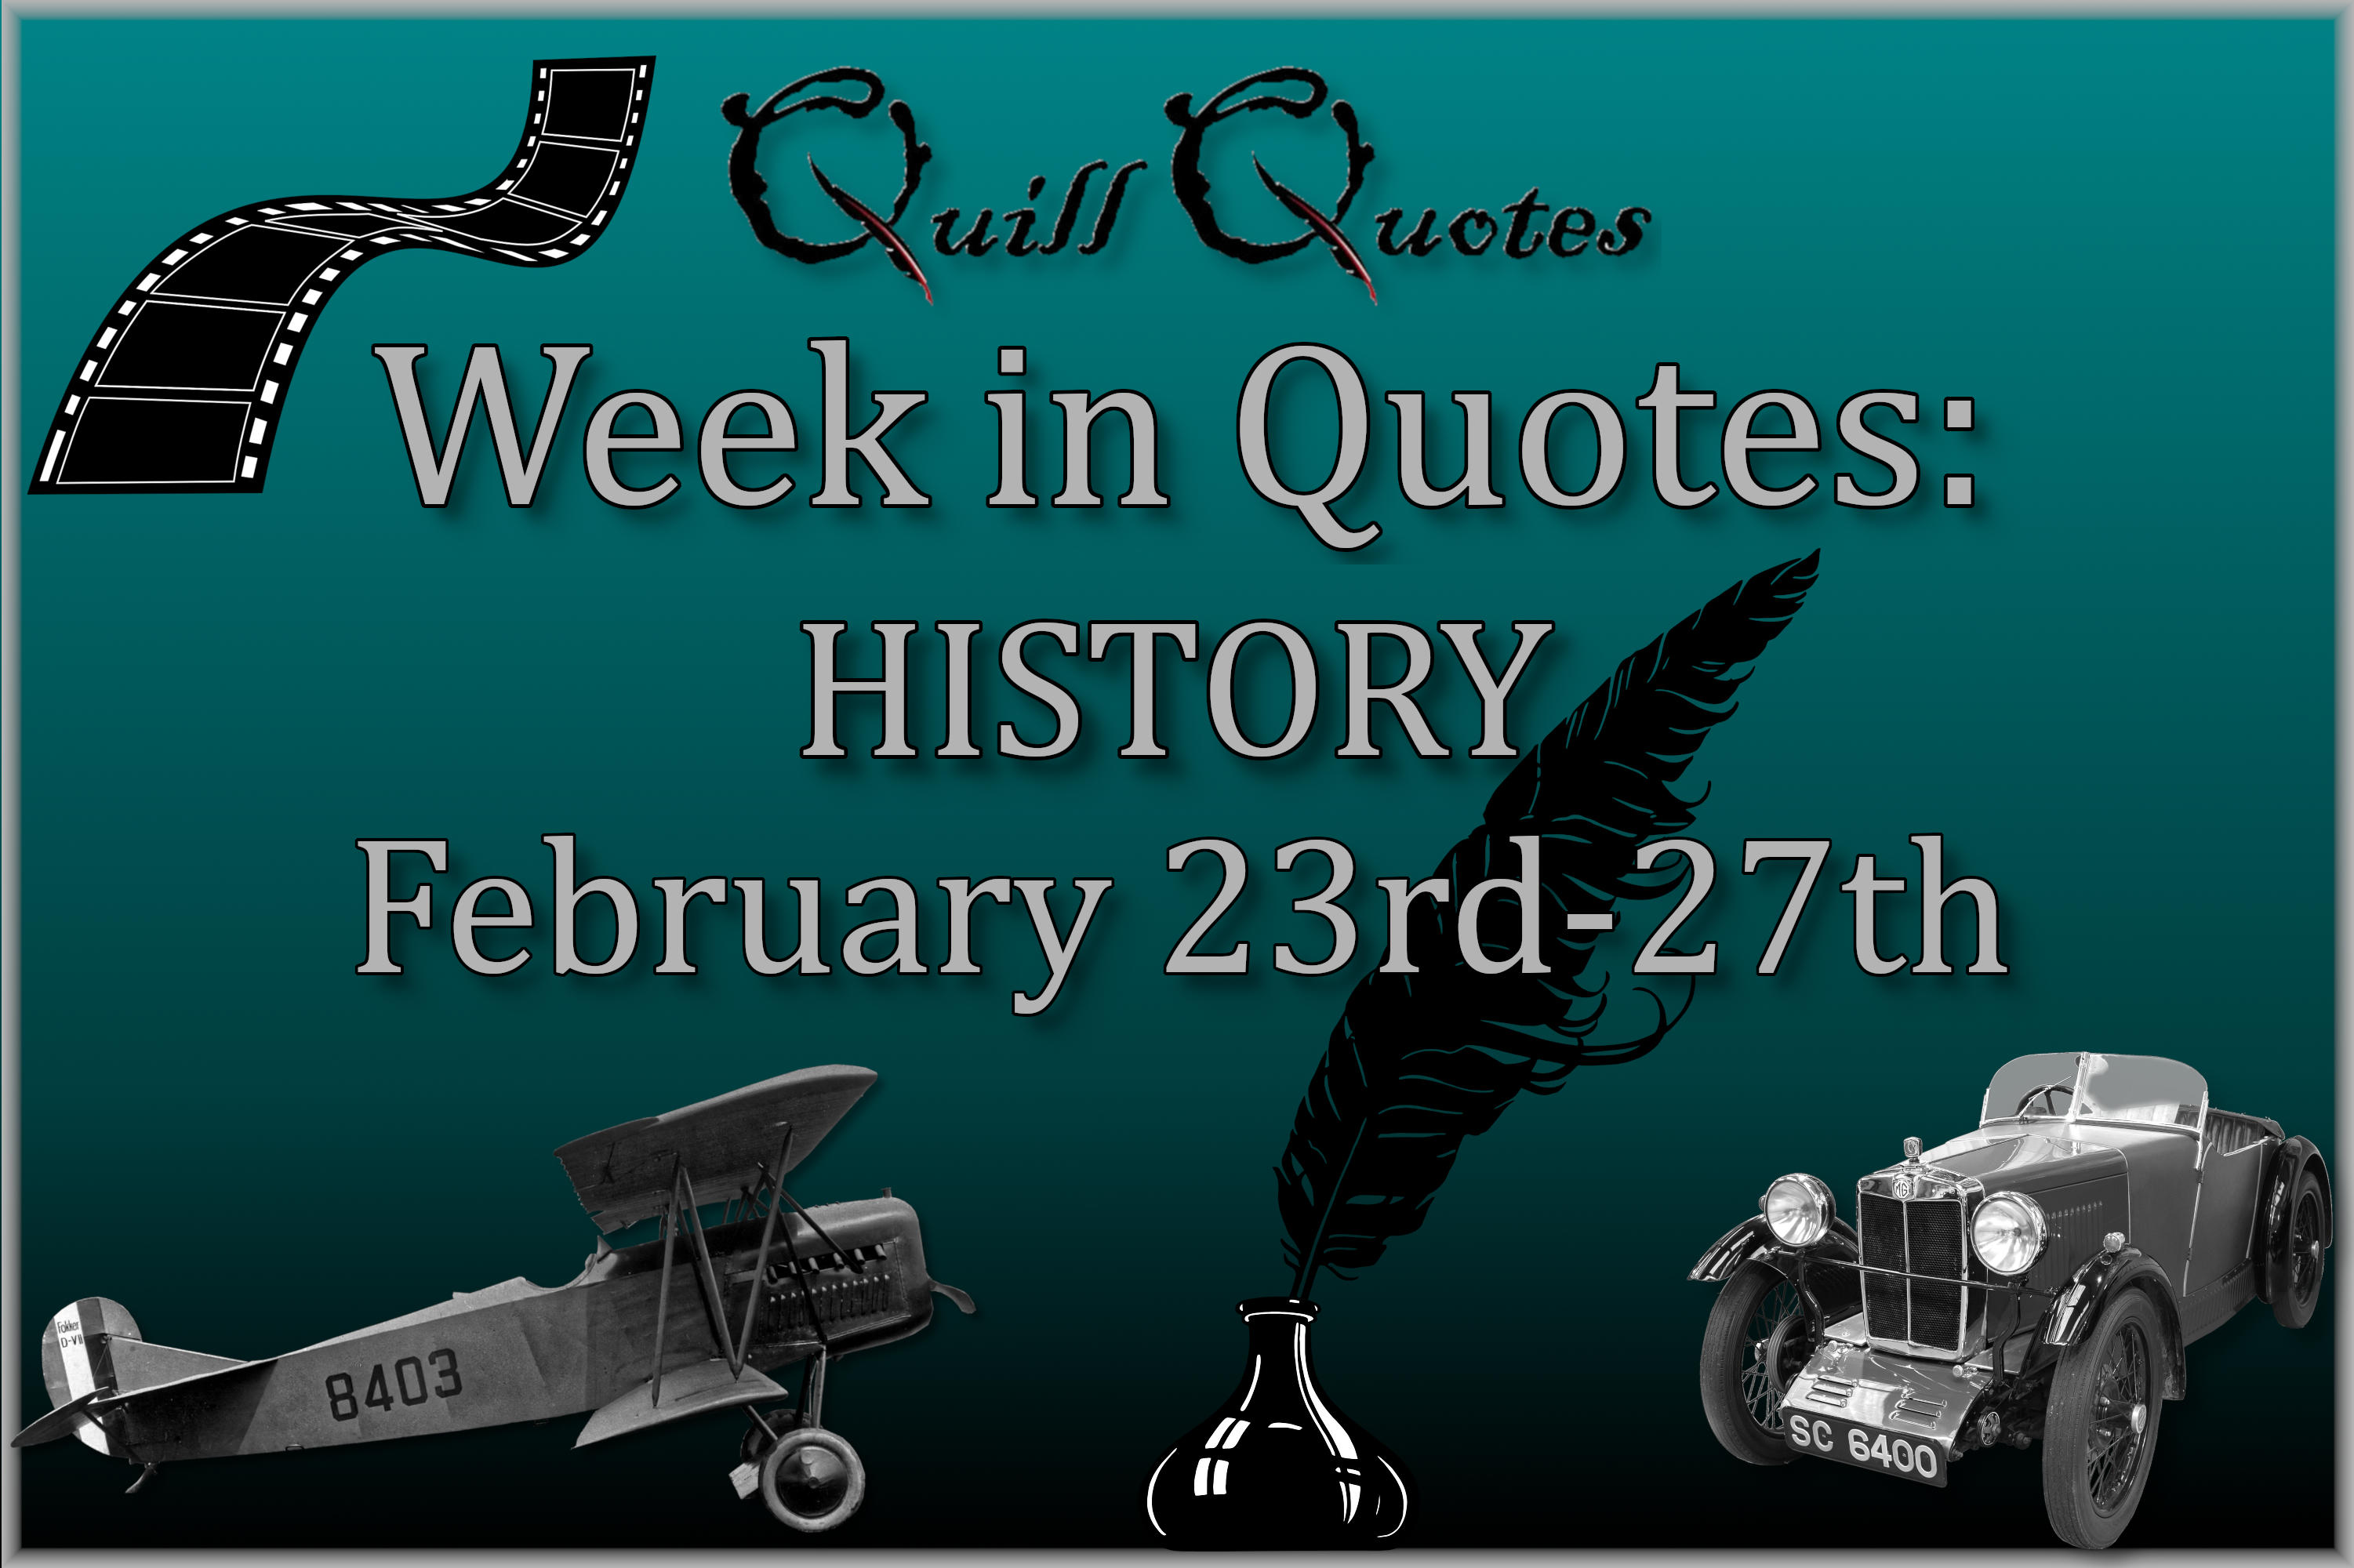 Week in Quotes: HISTORY February 23rd-27th